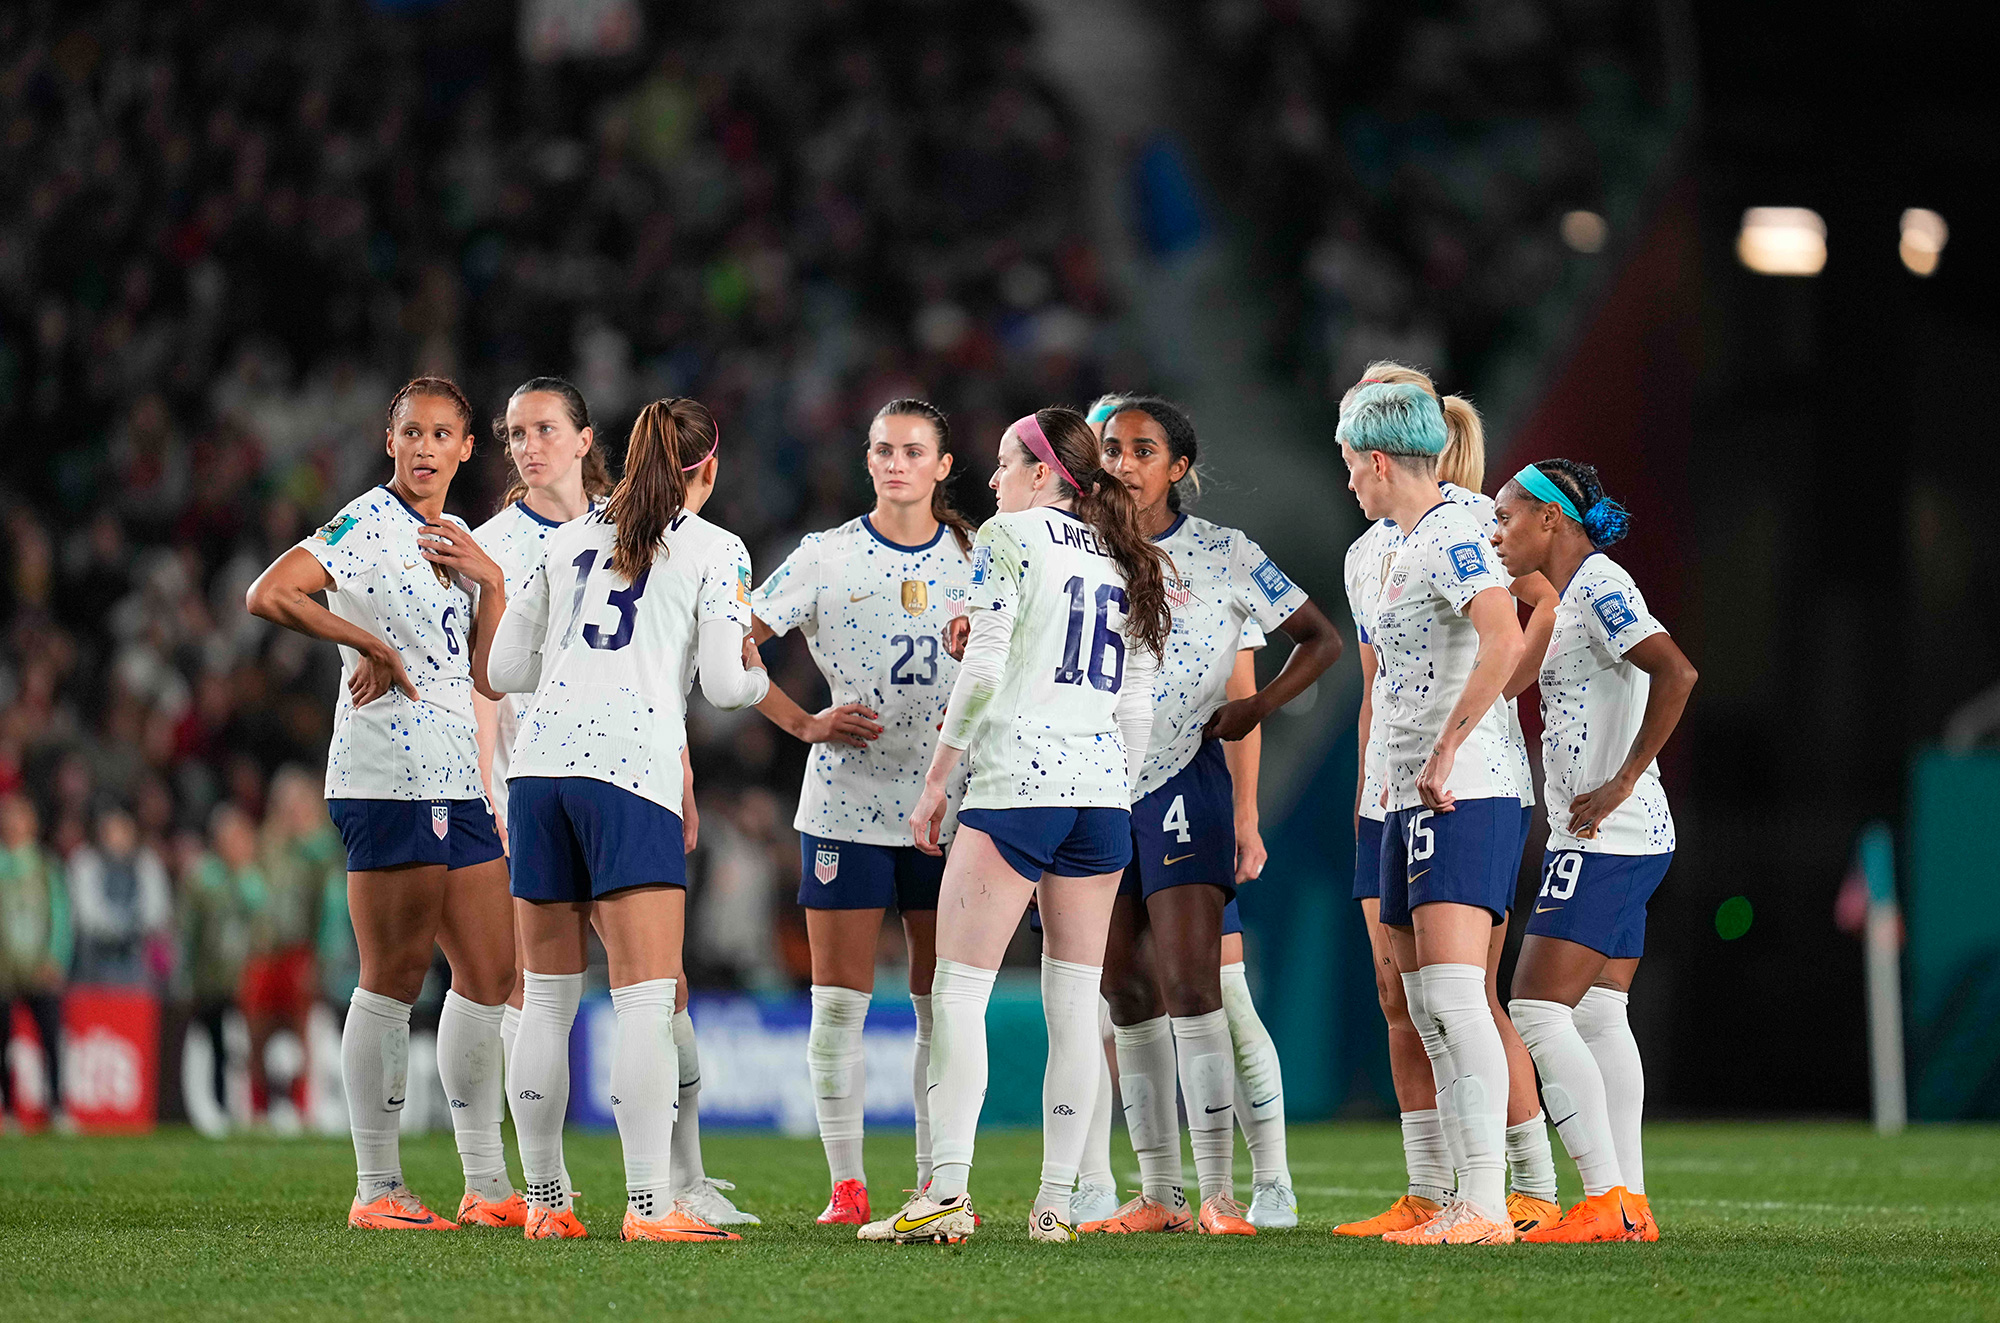 Team USA during the match against Portugal.